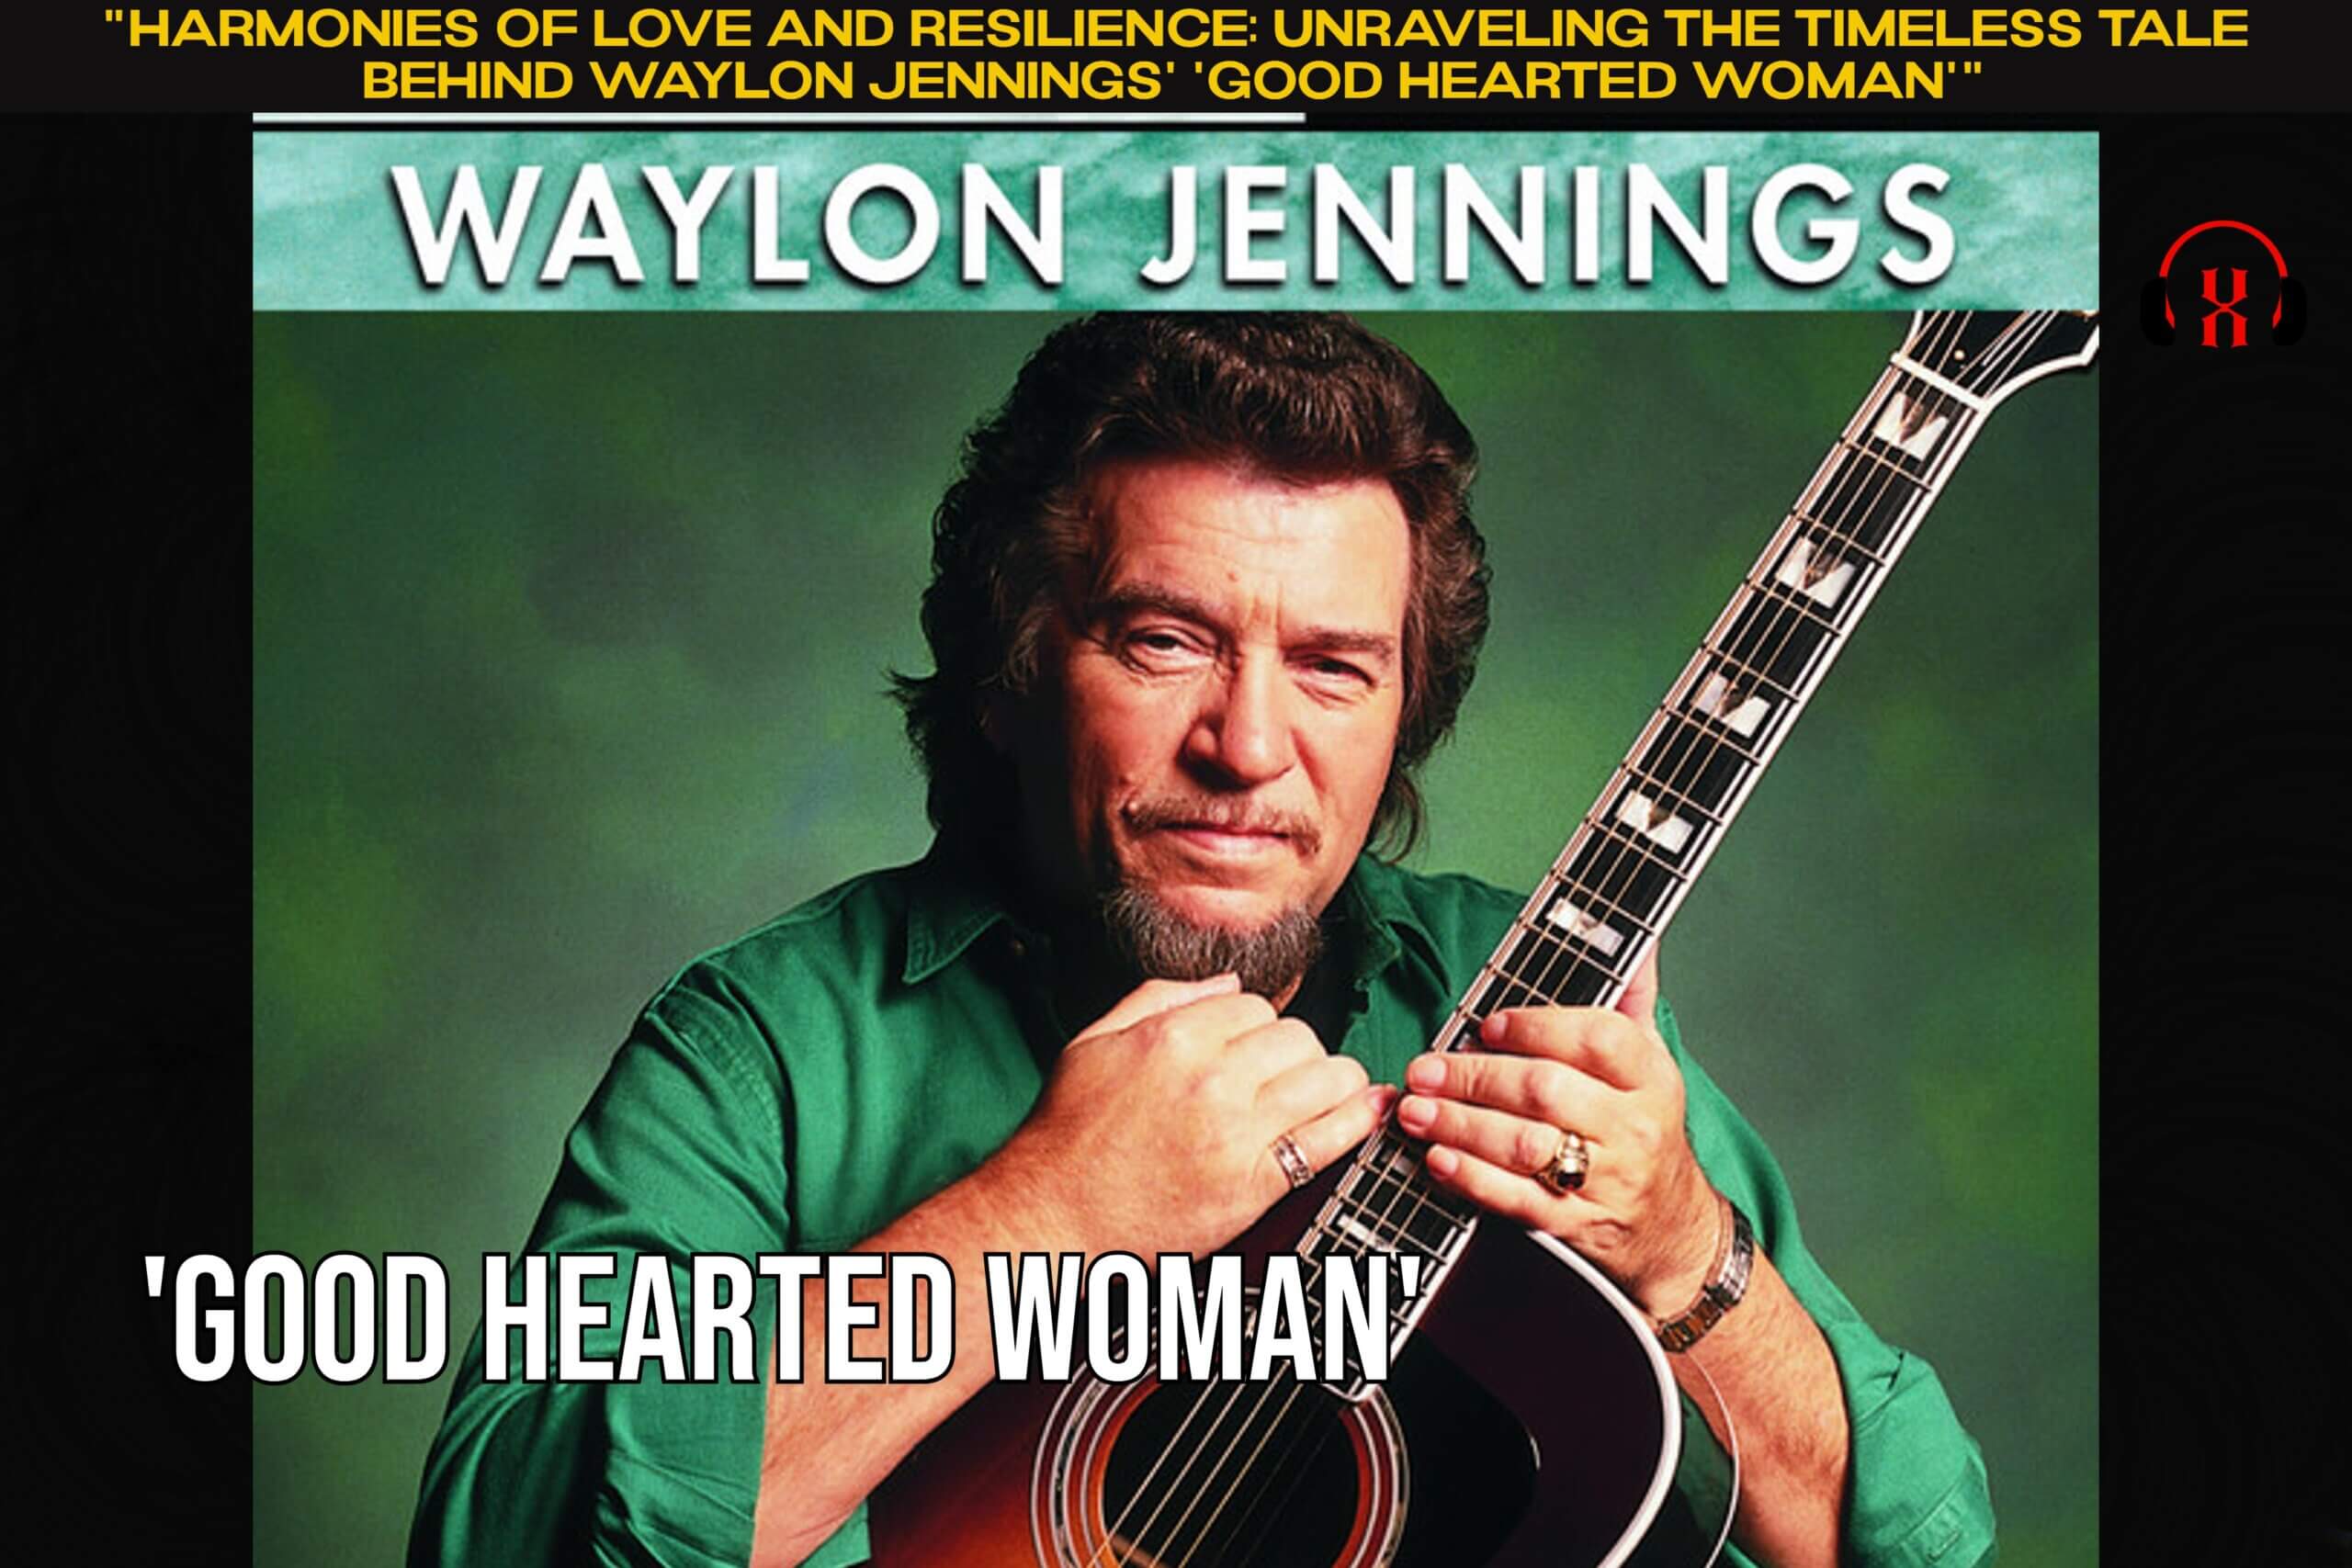 "Harmonies of Love and Resilience: Unraveling the Timeless Tale Behind Waylon Jennings' 'Good Hearted Woman'"